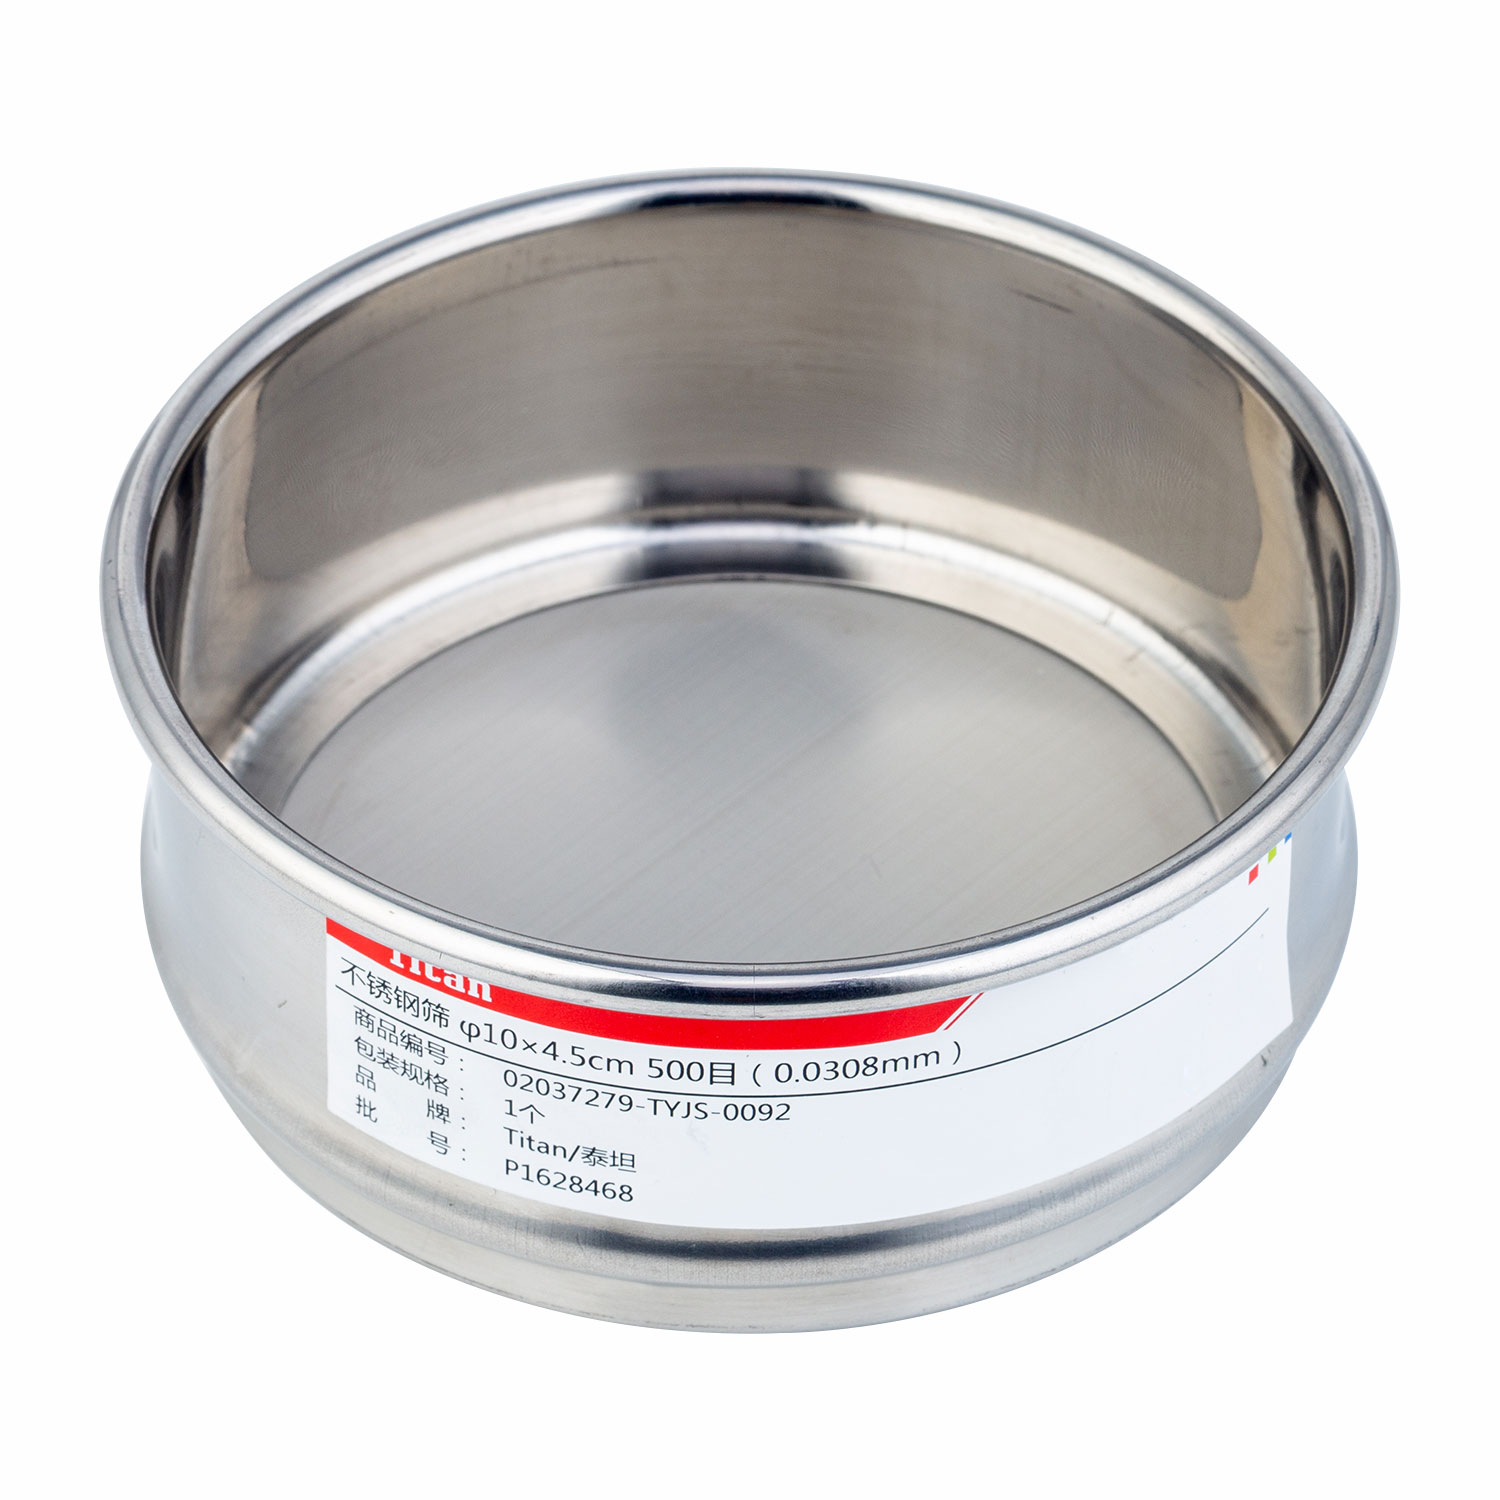 Wholesale φ10×4.5cm 500 Mesh 304 Stainless Lab Sieves Economy Test Sieve 304 Stainless Steel Wire Cloth（0.0308mm）